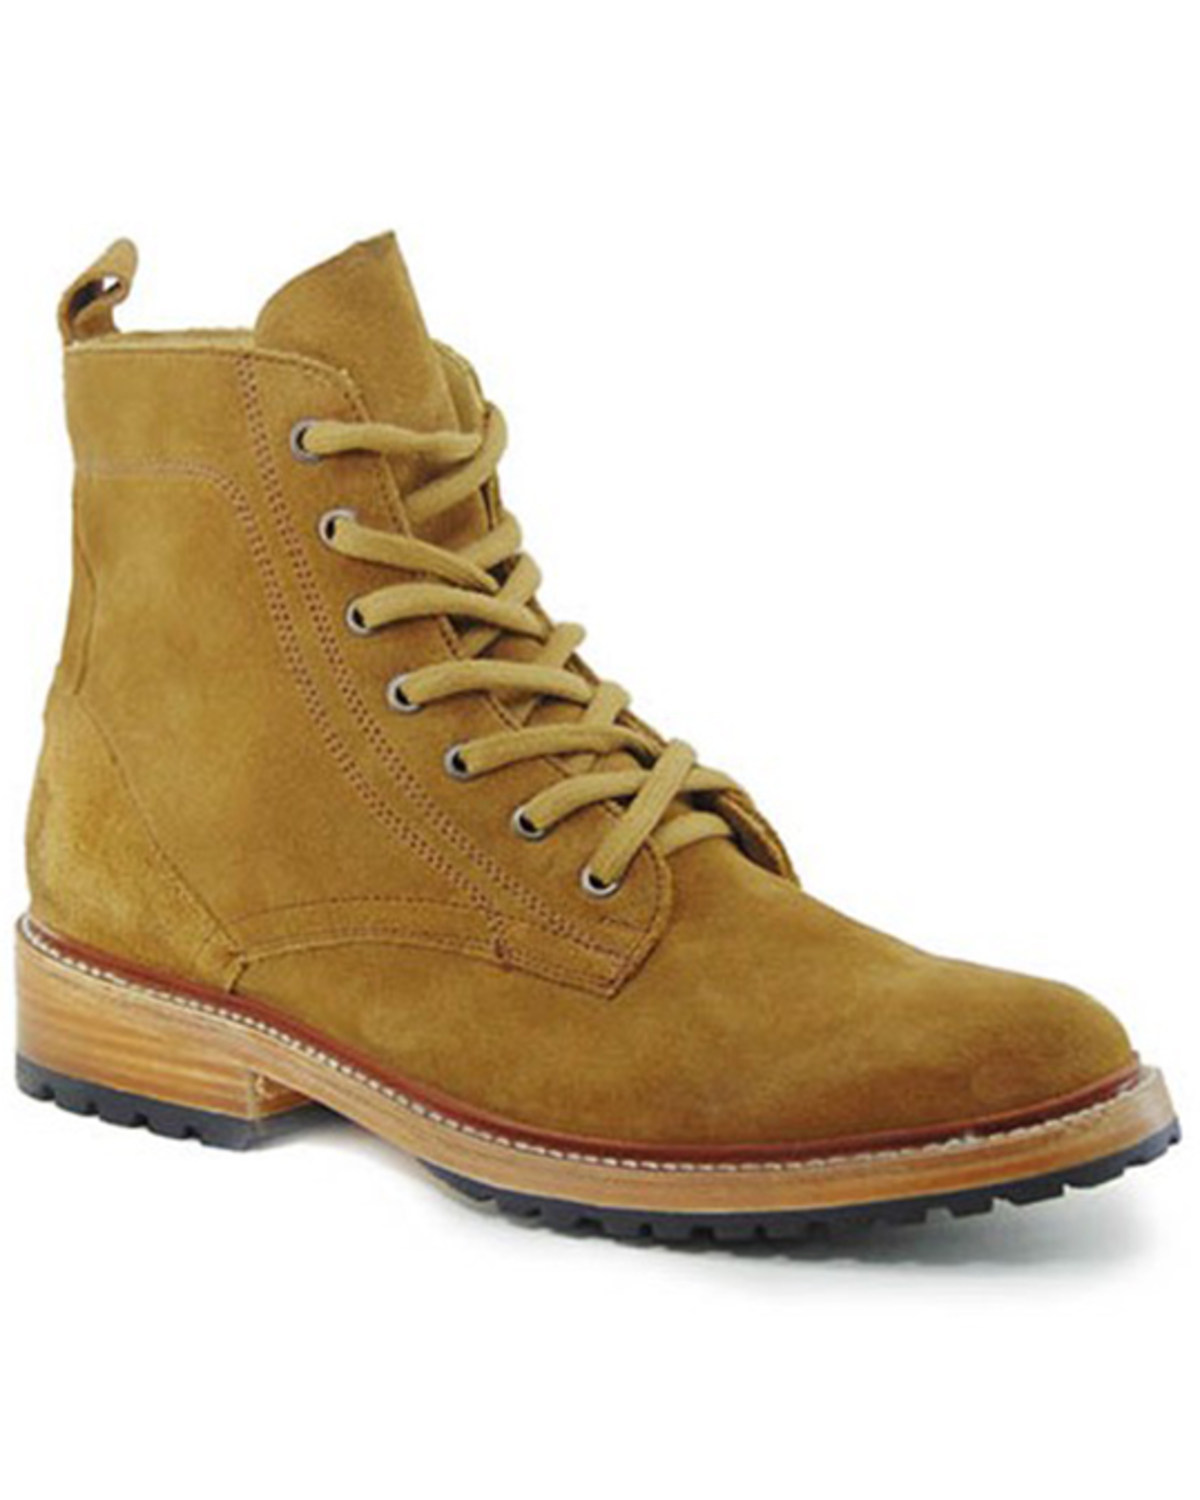 Stetson Men's All-Over Suede Casual Lace-Up Chukka Boots - Round Toe